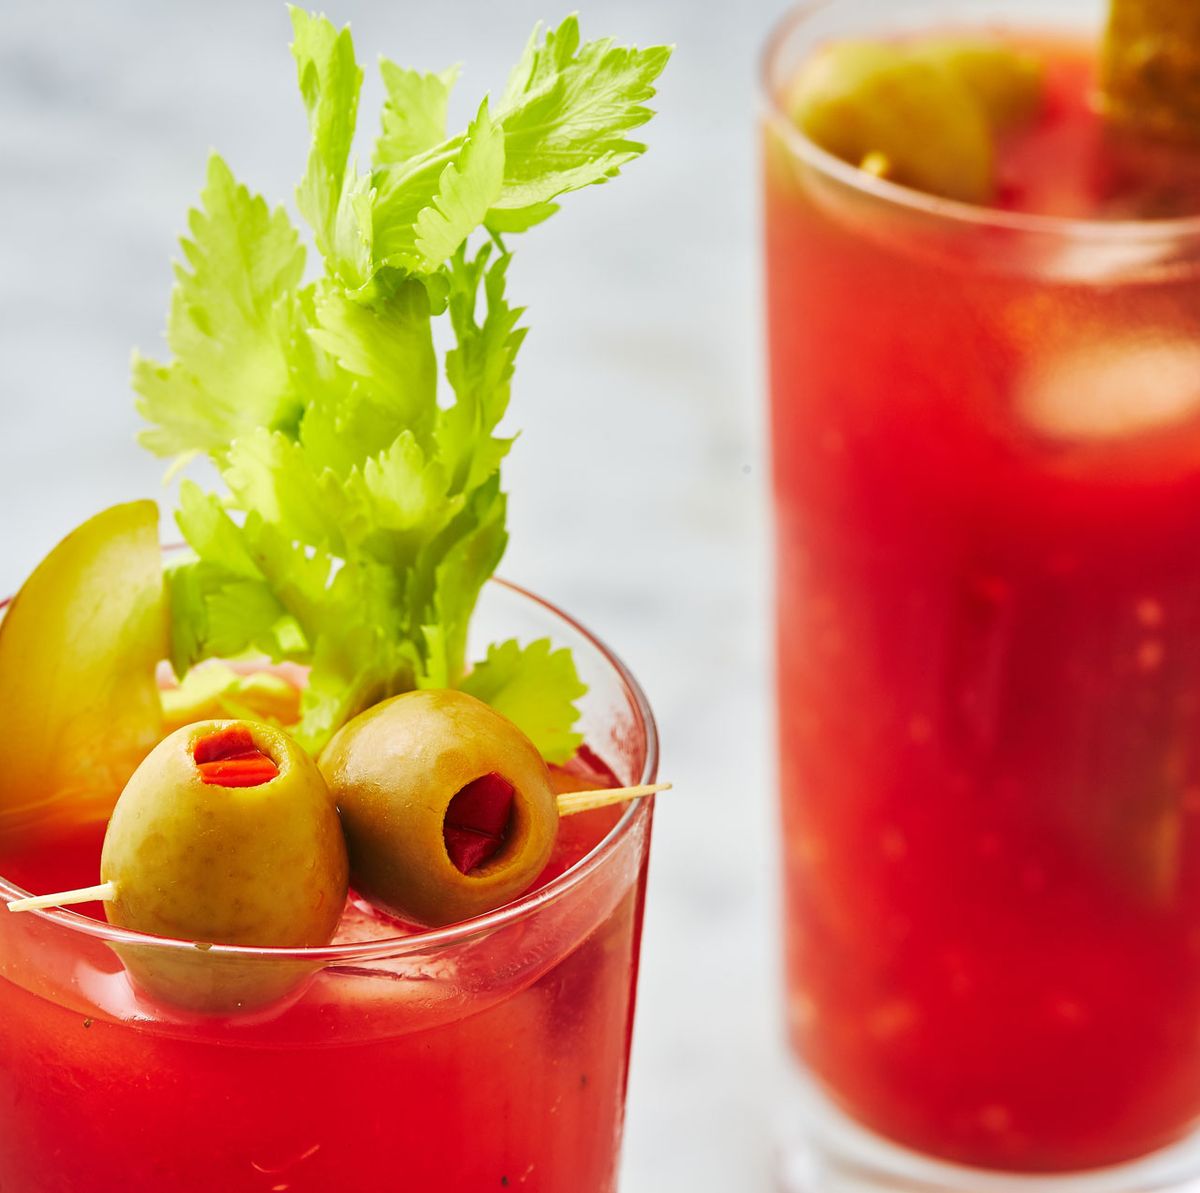 https://hips.hearstapps.com/hmg-prod/images/delish-191908-classic-bloody-mary-0495-landscape-pf-1568906313.jpg?crop=0.670xw:1.00xh;0.167xw,0&resize=1200:*